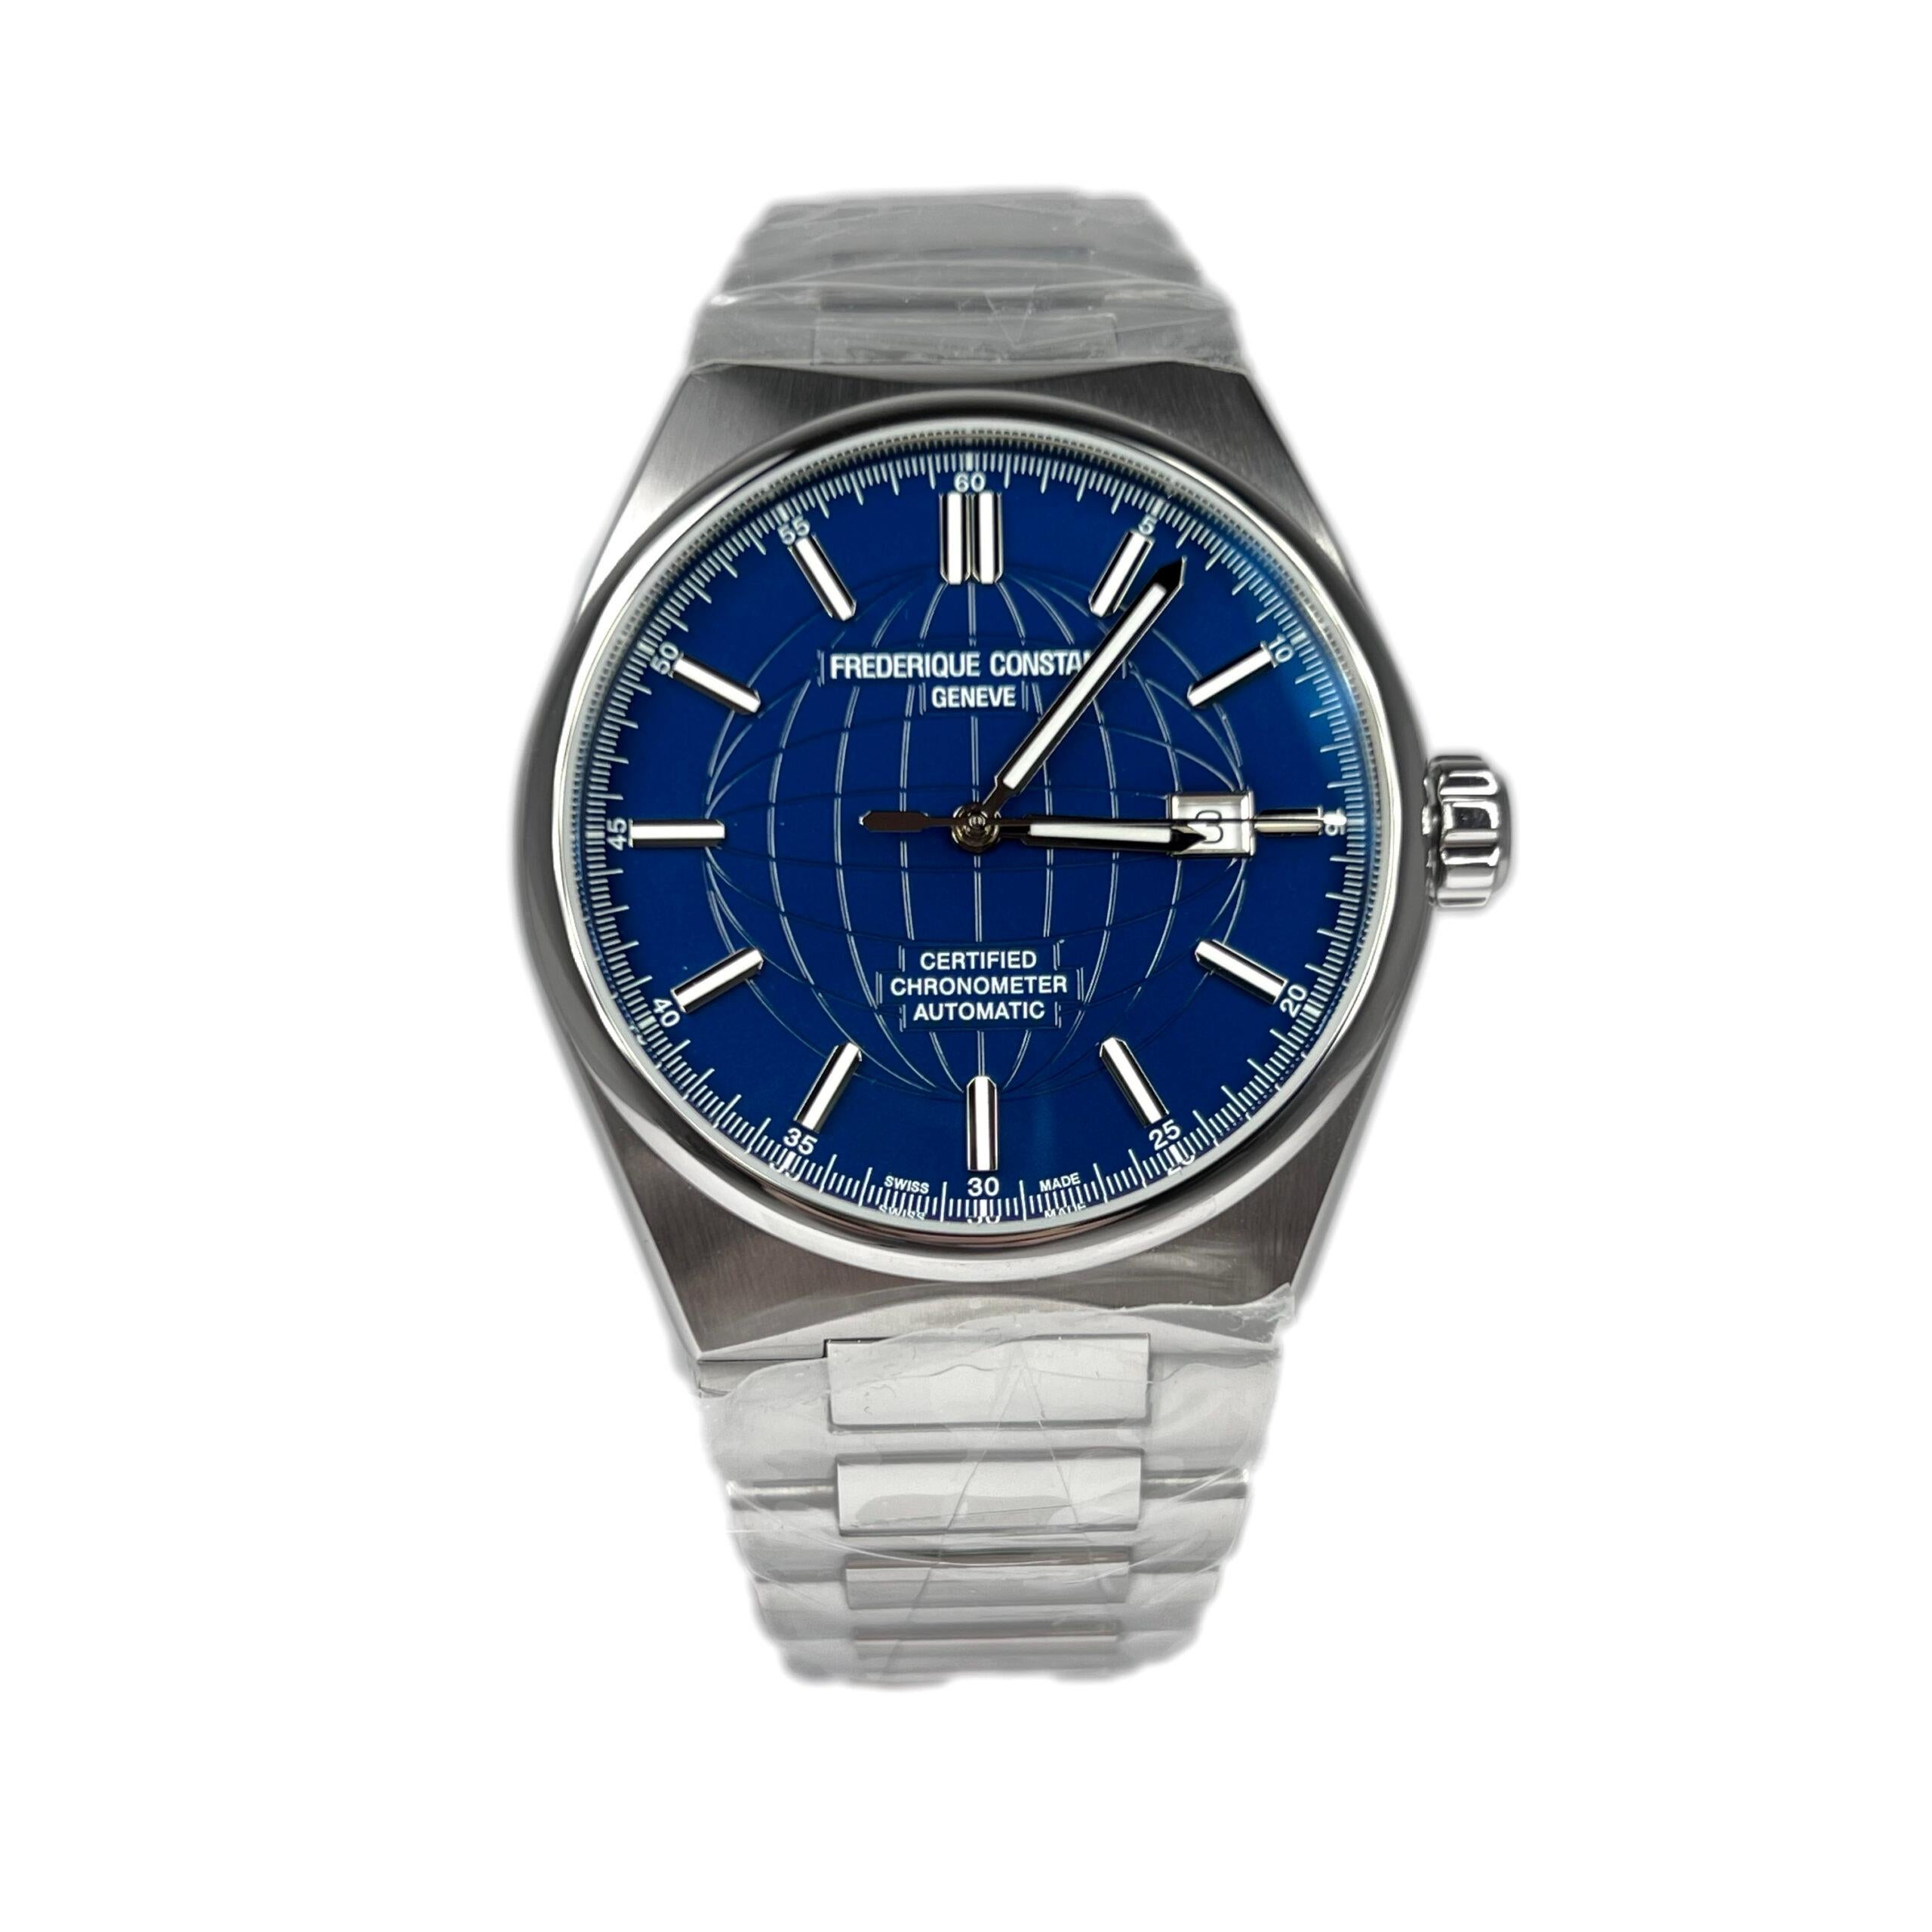 This Men’s Watch has a 41 mm stainless steel case with a stainless steel bracelet. Fixed stainless steel bezel. Blue dial with luminous grey hands and index hour markers. Arabic numeral minute markers (at 5 minute intervals). Minute markers around